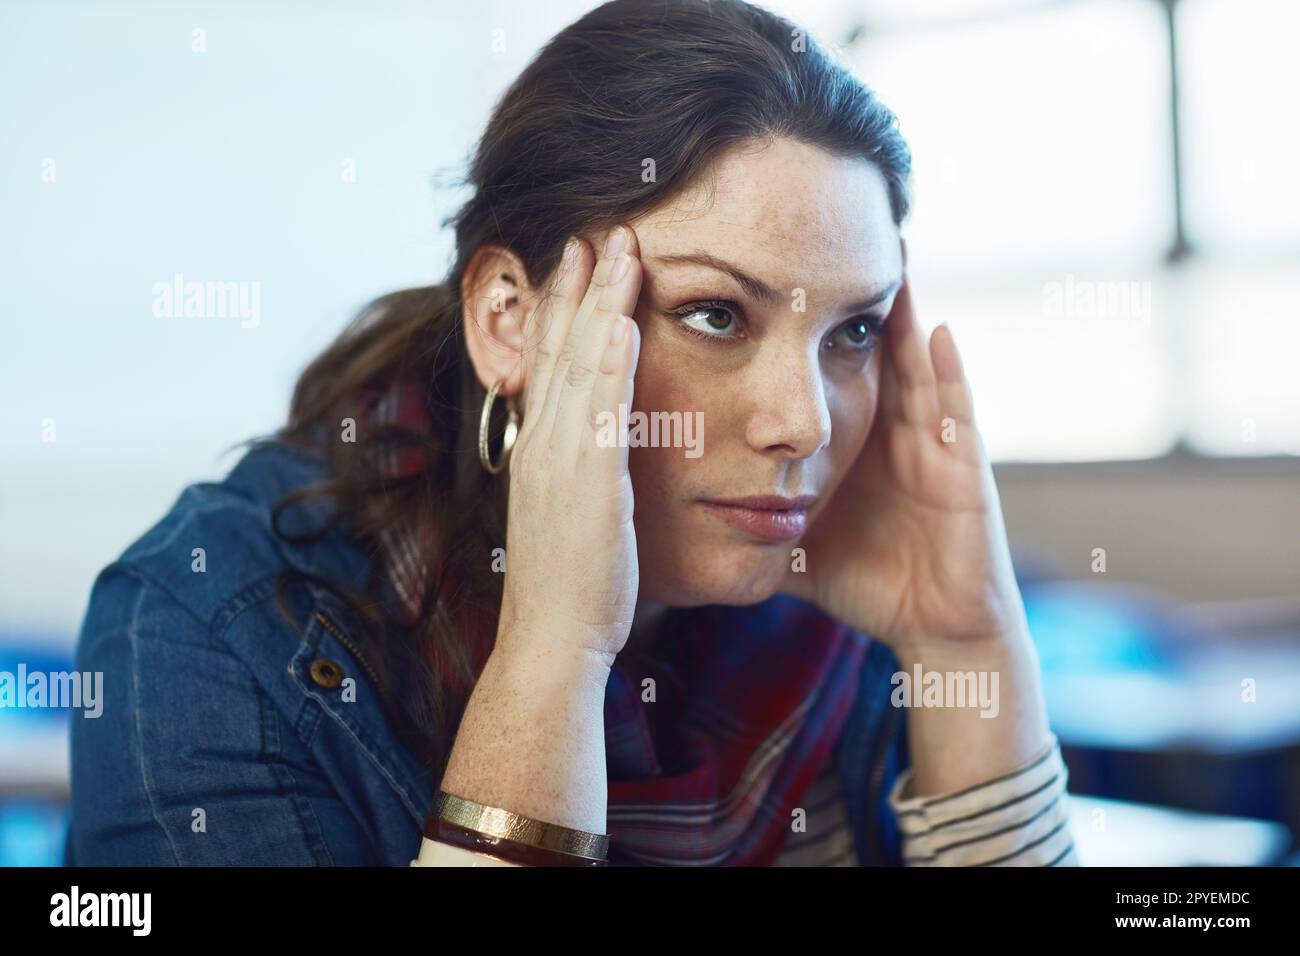 The stress is getting to her. a university student looking stressed out at campus. Stock Photo